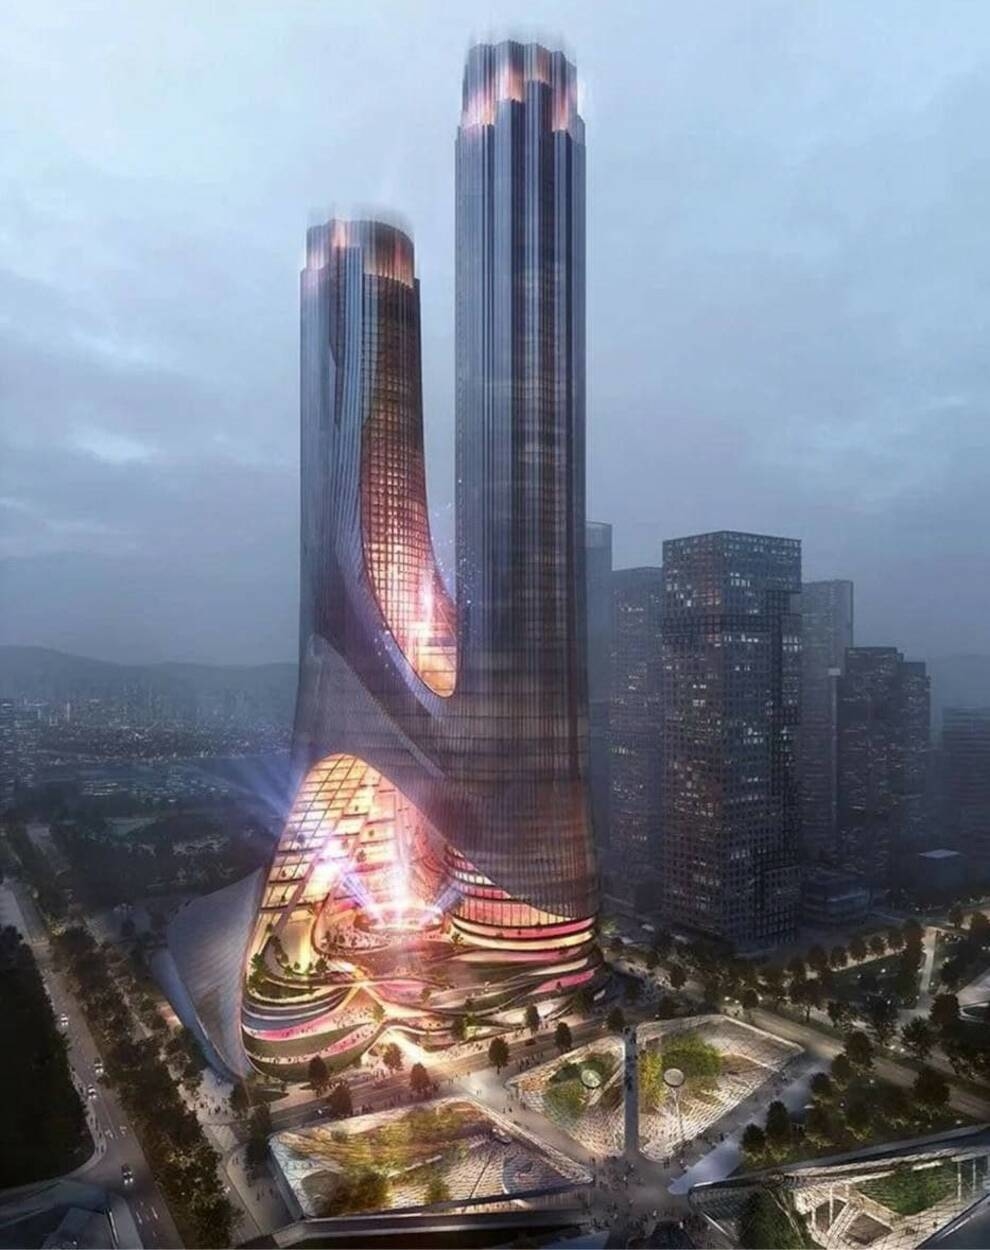 No surprise: first mega tower to appear in China